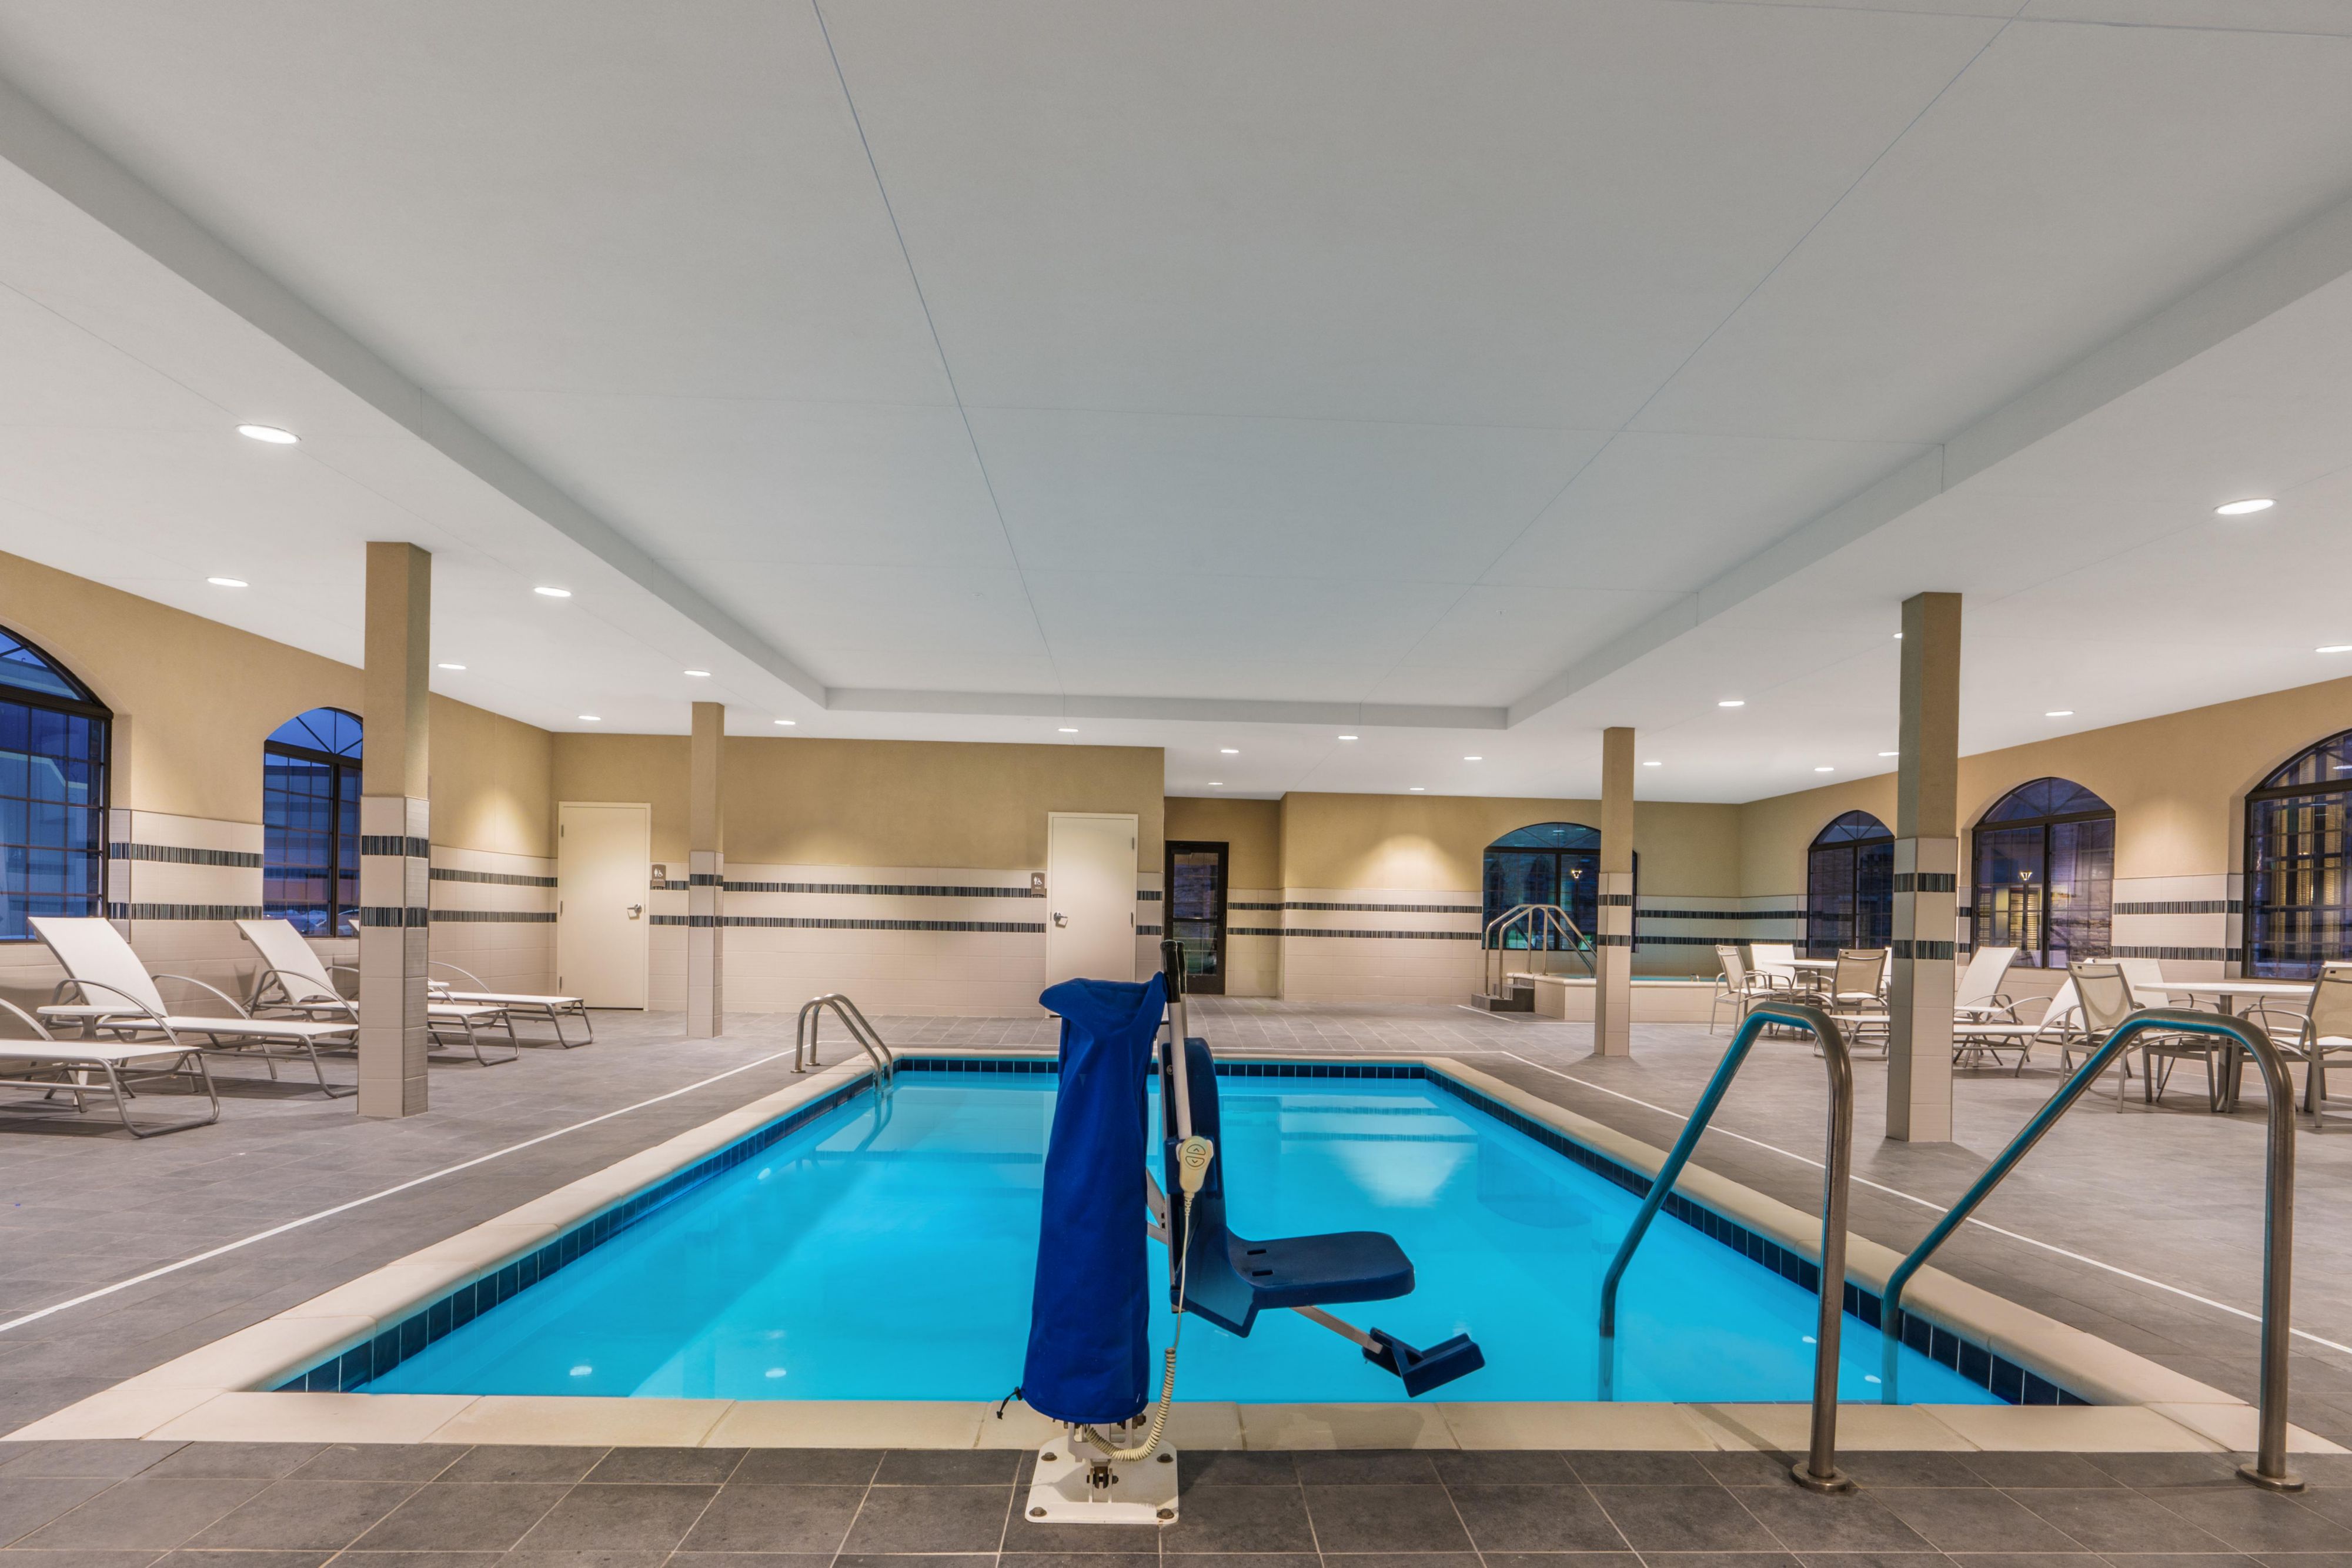 Enjoy our indoor pool at your leisure between the hours of 7am-10pm.